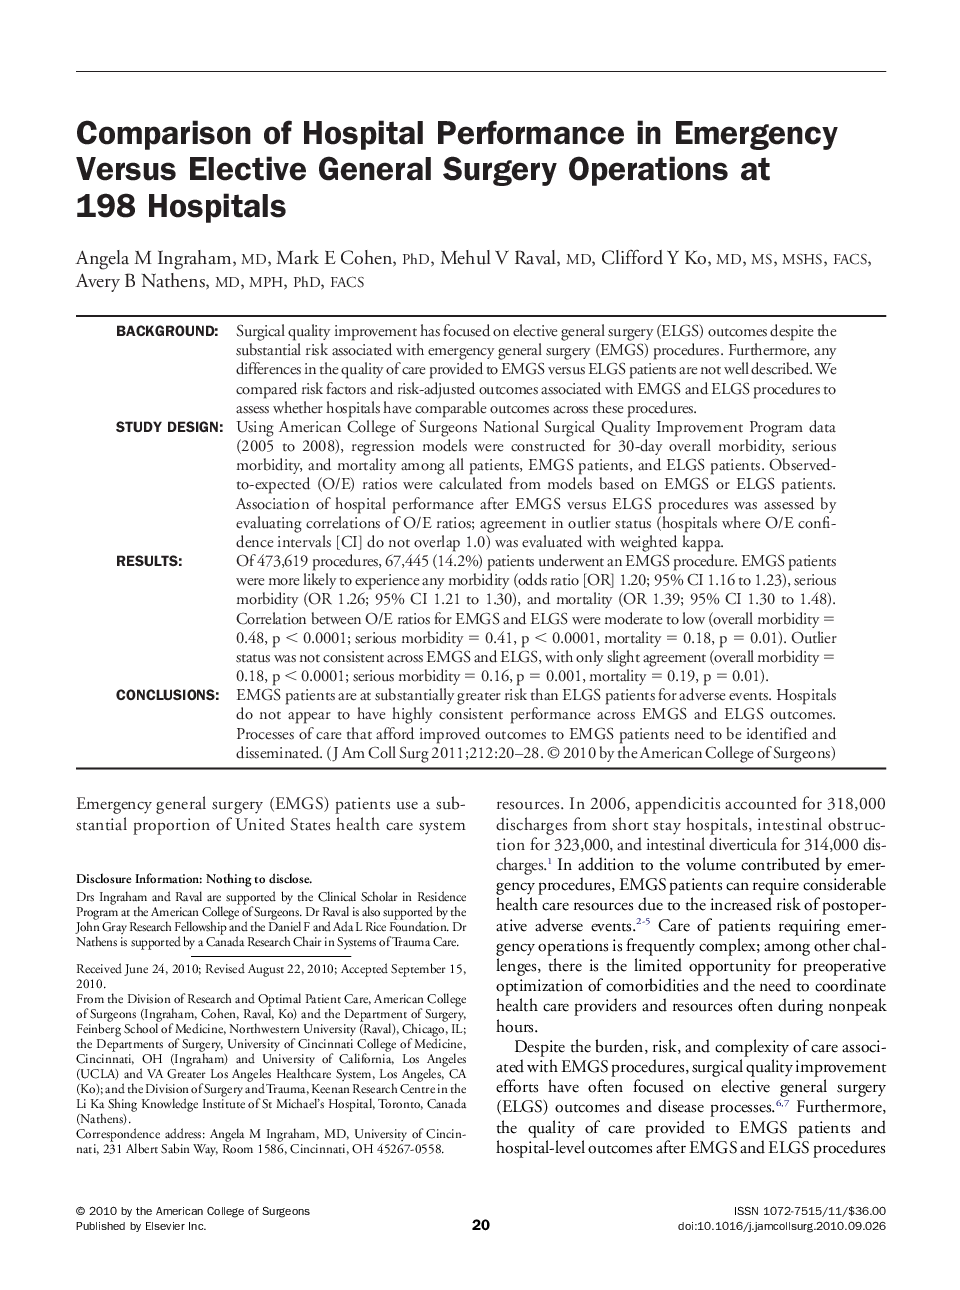 Comparison of Hospital Performance in Emergency Versus Elective General Surgery Operations at 198 Hospitals